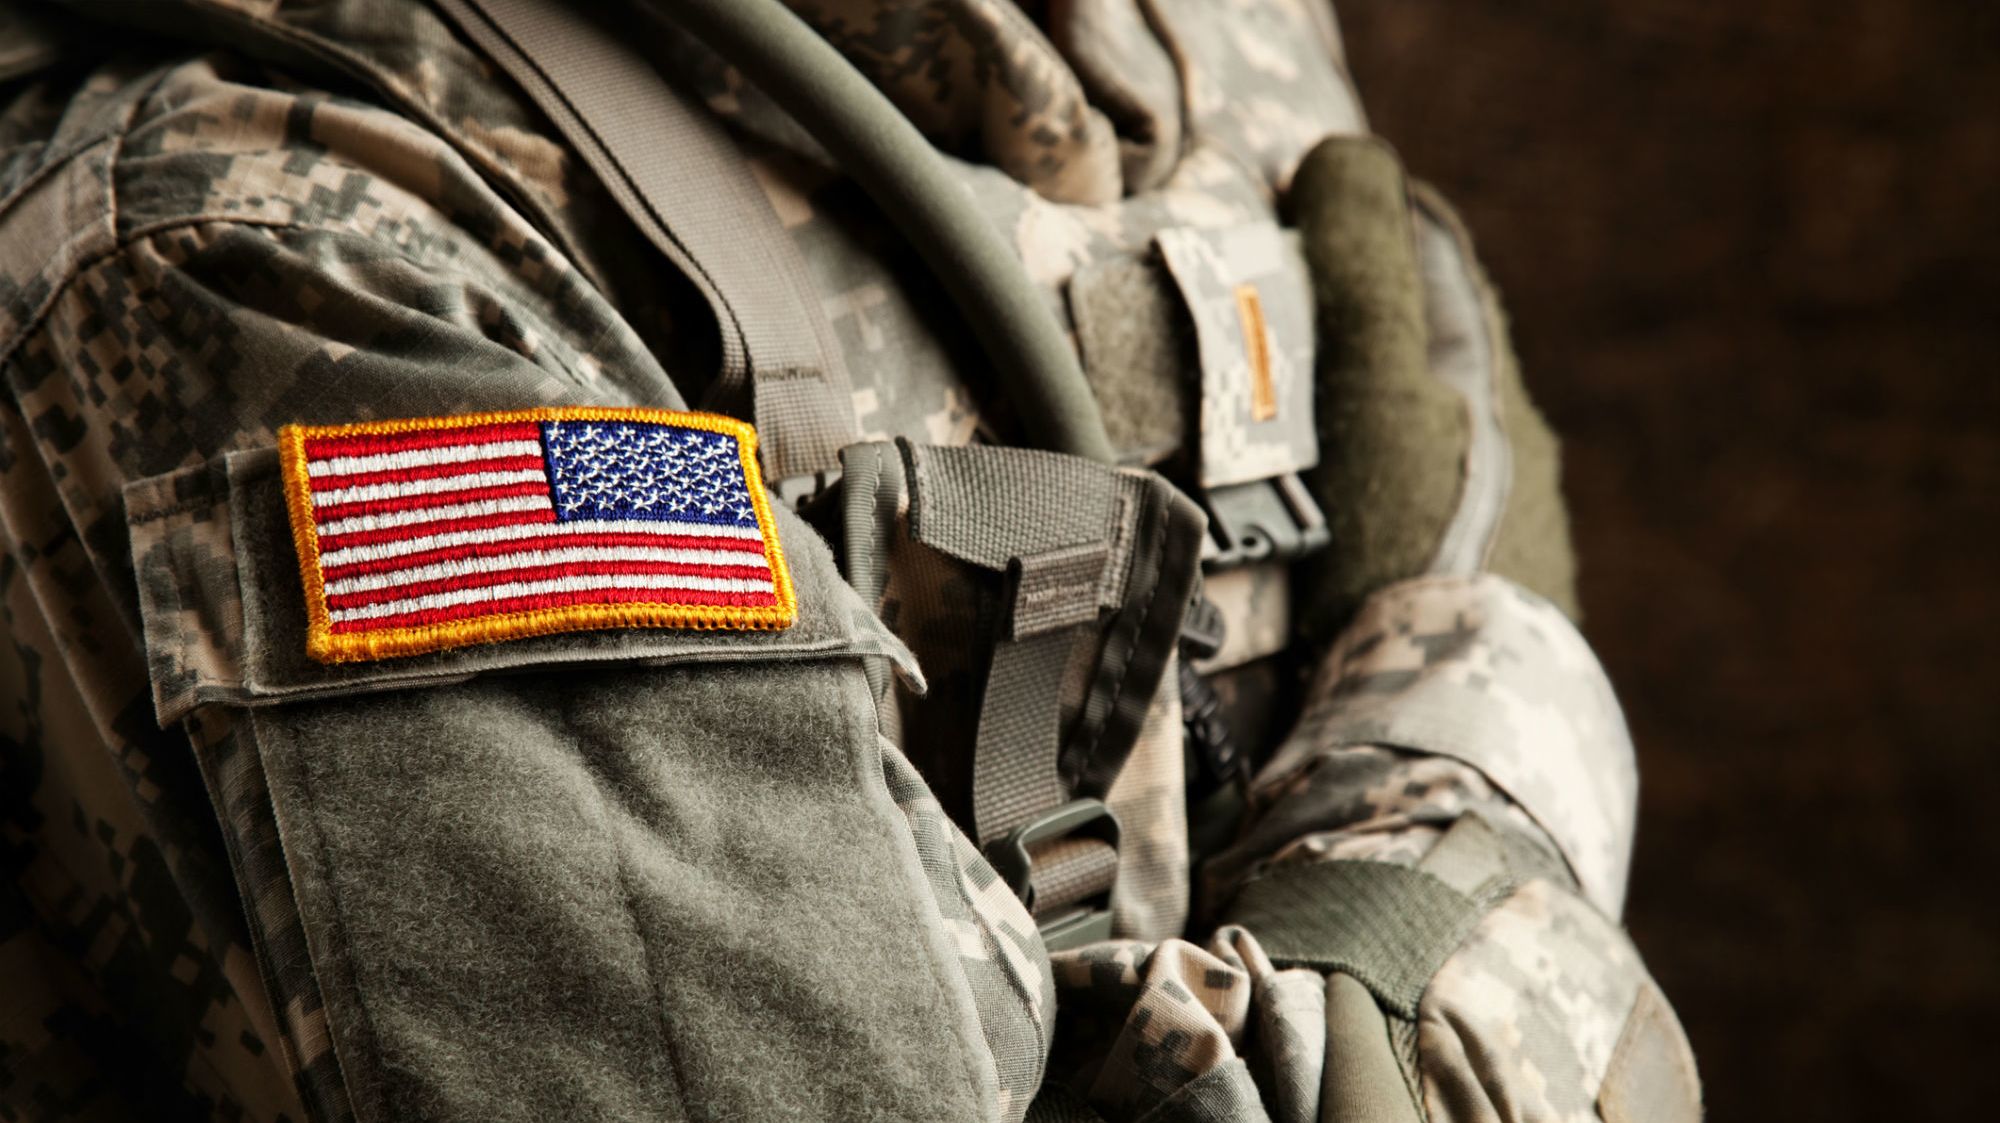 why-is-the-american-flag-displayed-backwards-on-military-uniforms